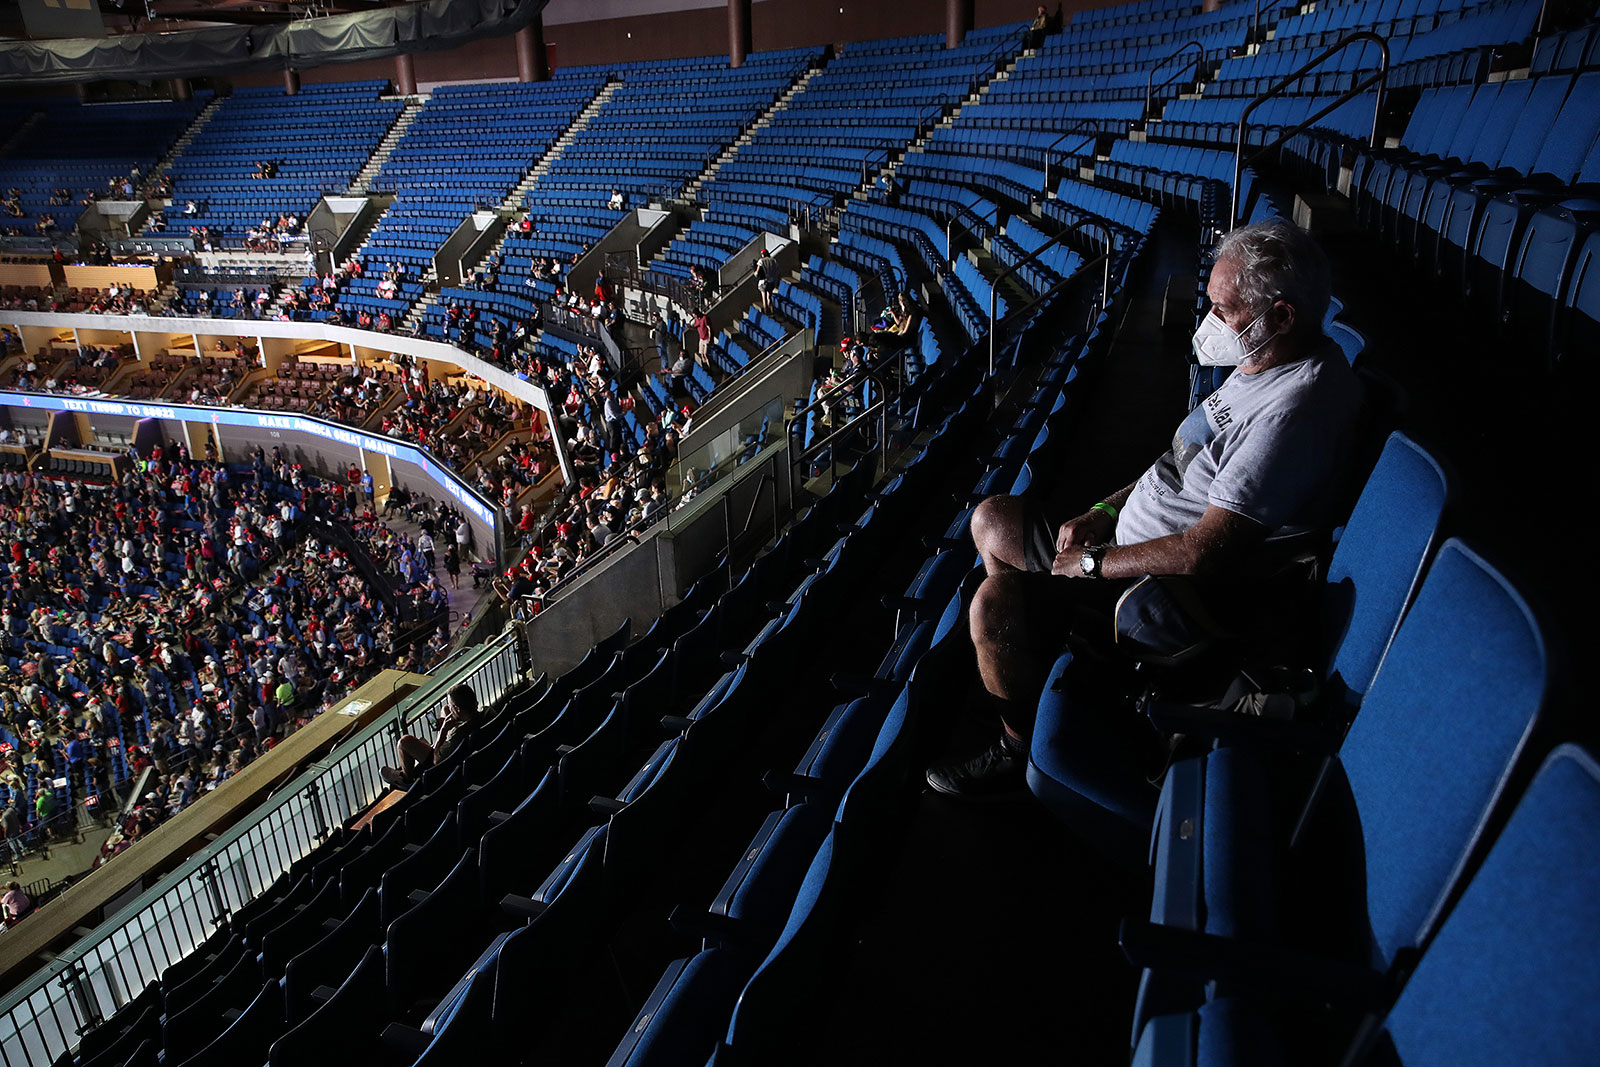 An attendee sits in the upper section of the Bank of Oklahoma Center prior to Trump's campaign rally on Saturday.